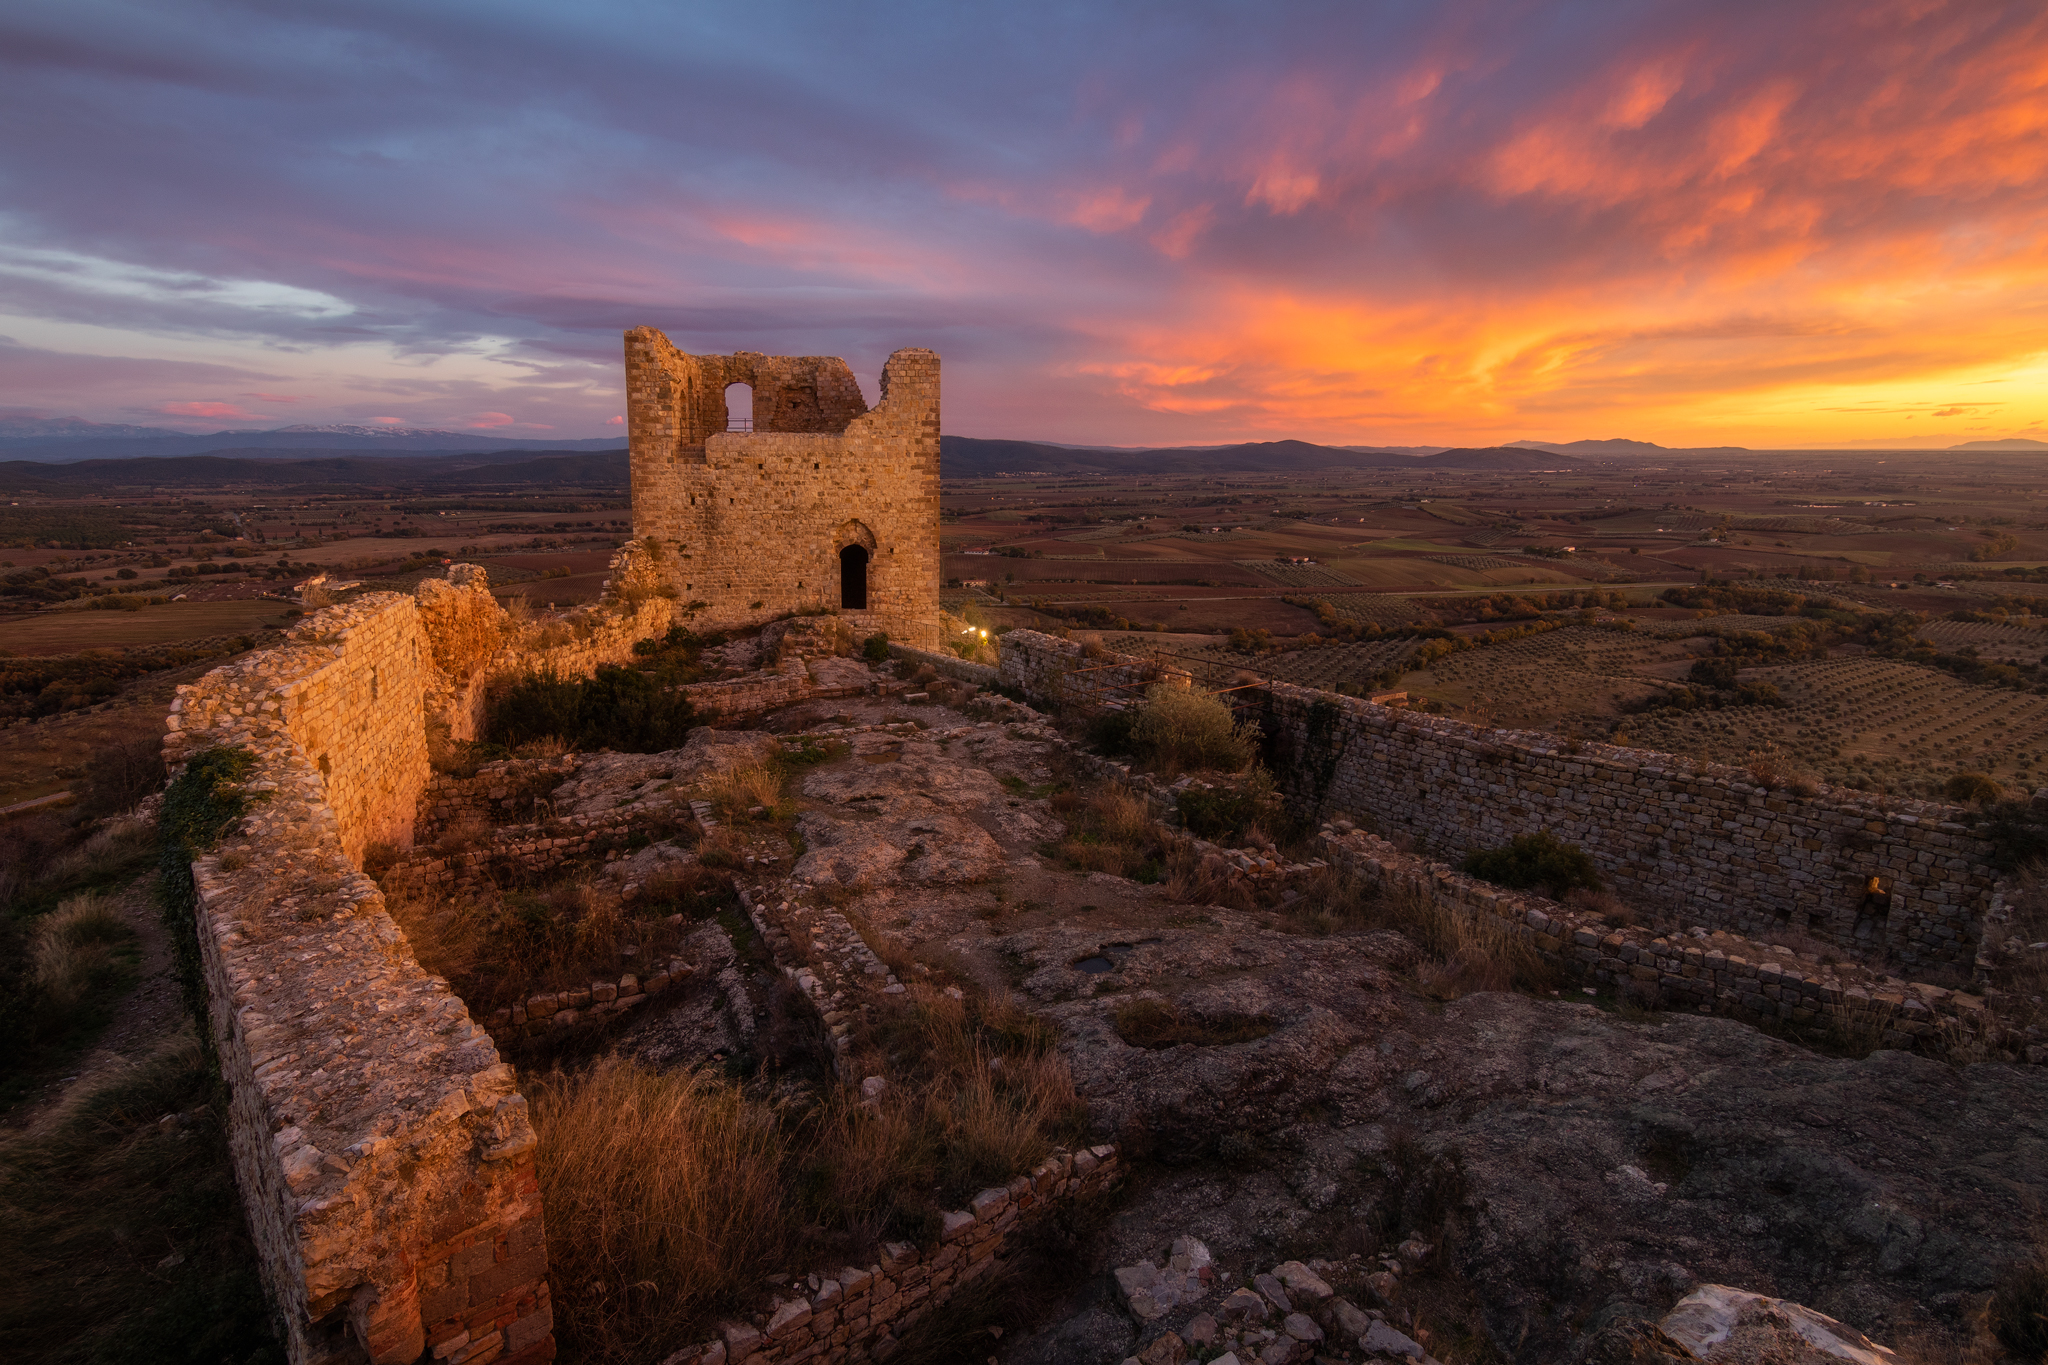 Sunset at the Castle (or what remains of it)...